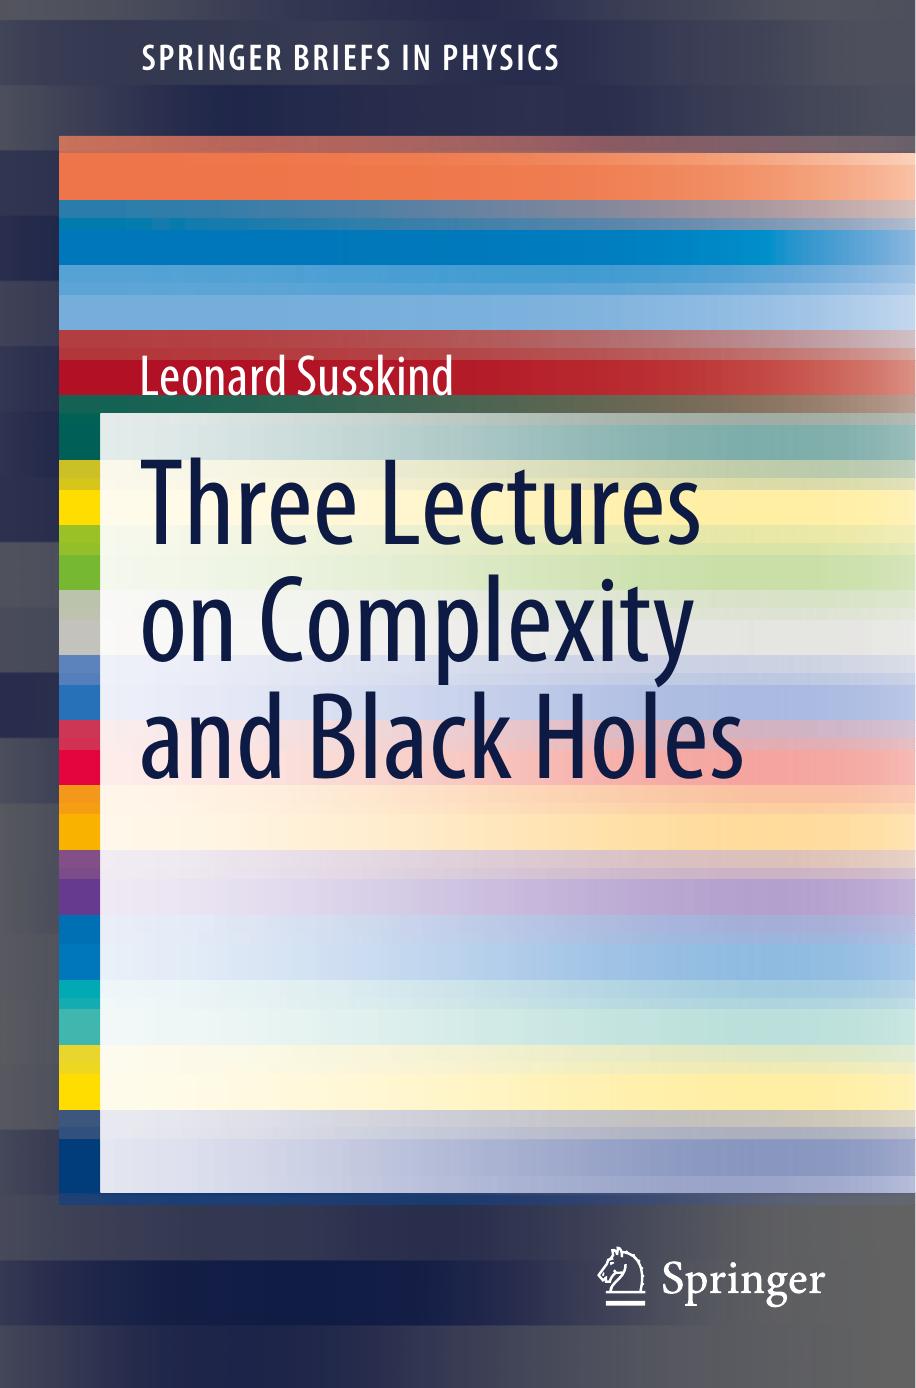 Three Lectures on Complexity and Black Holes by Leonard Susskind